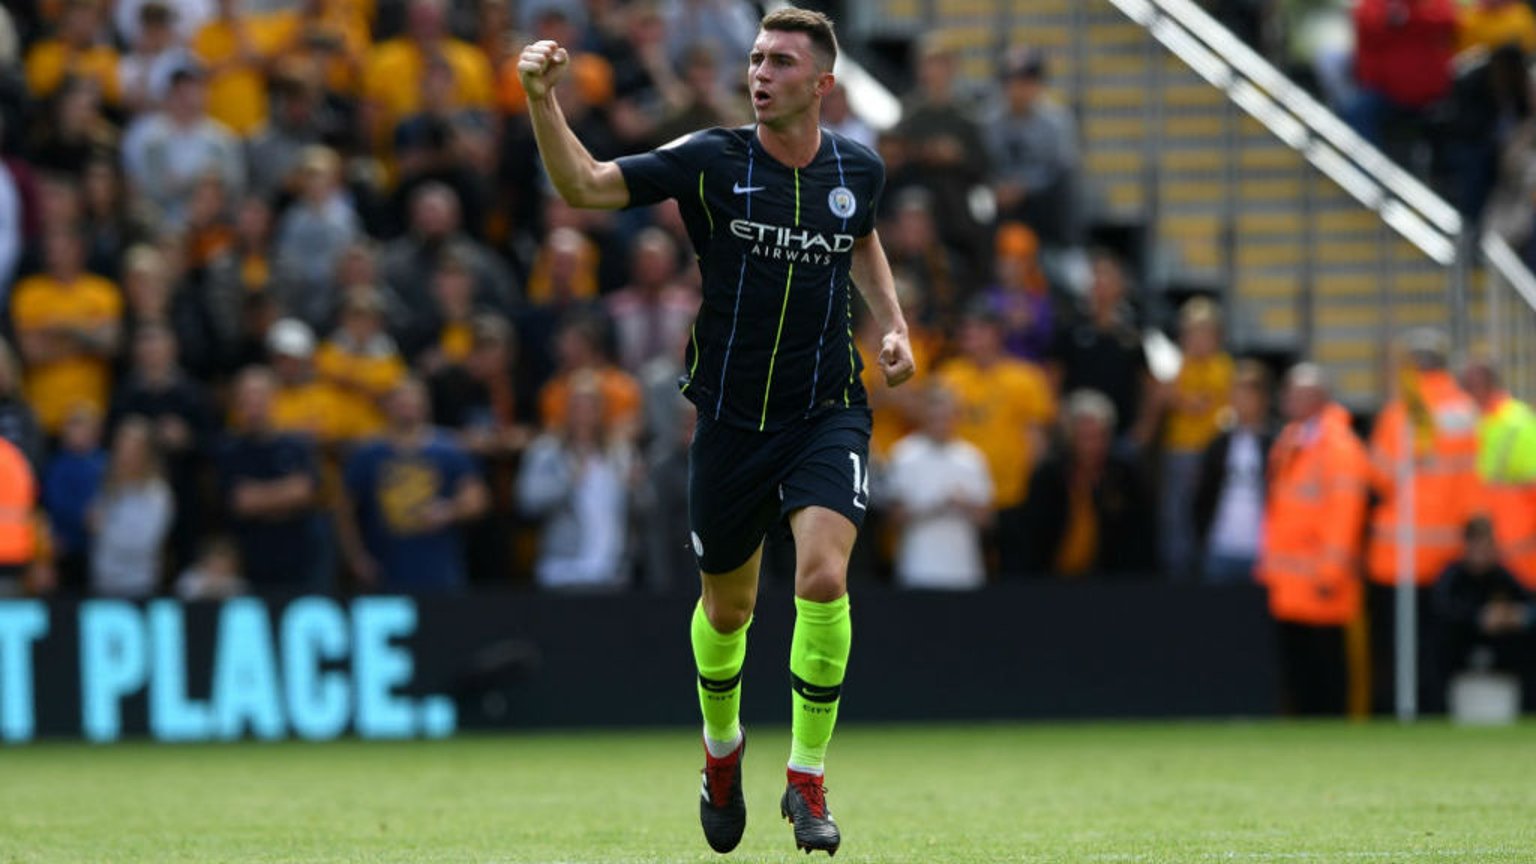 LEVEL BEST: Aymeric Laporte celebrates after heading home his first goal for the club